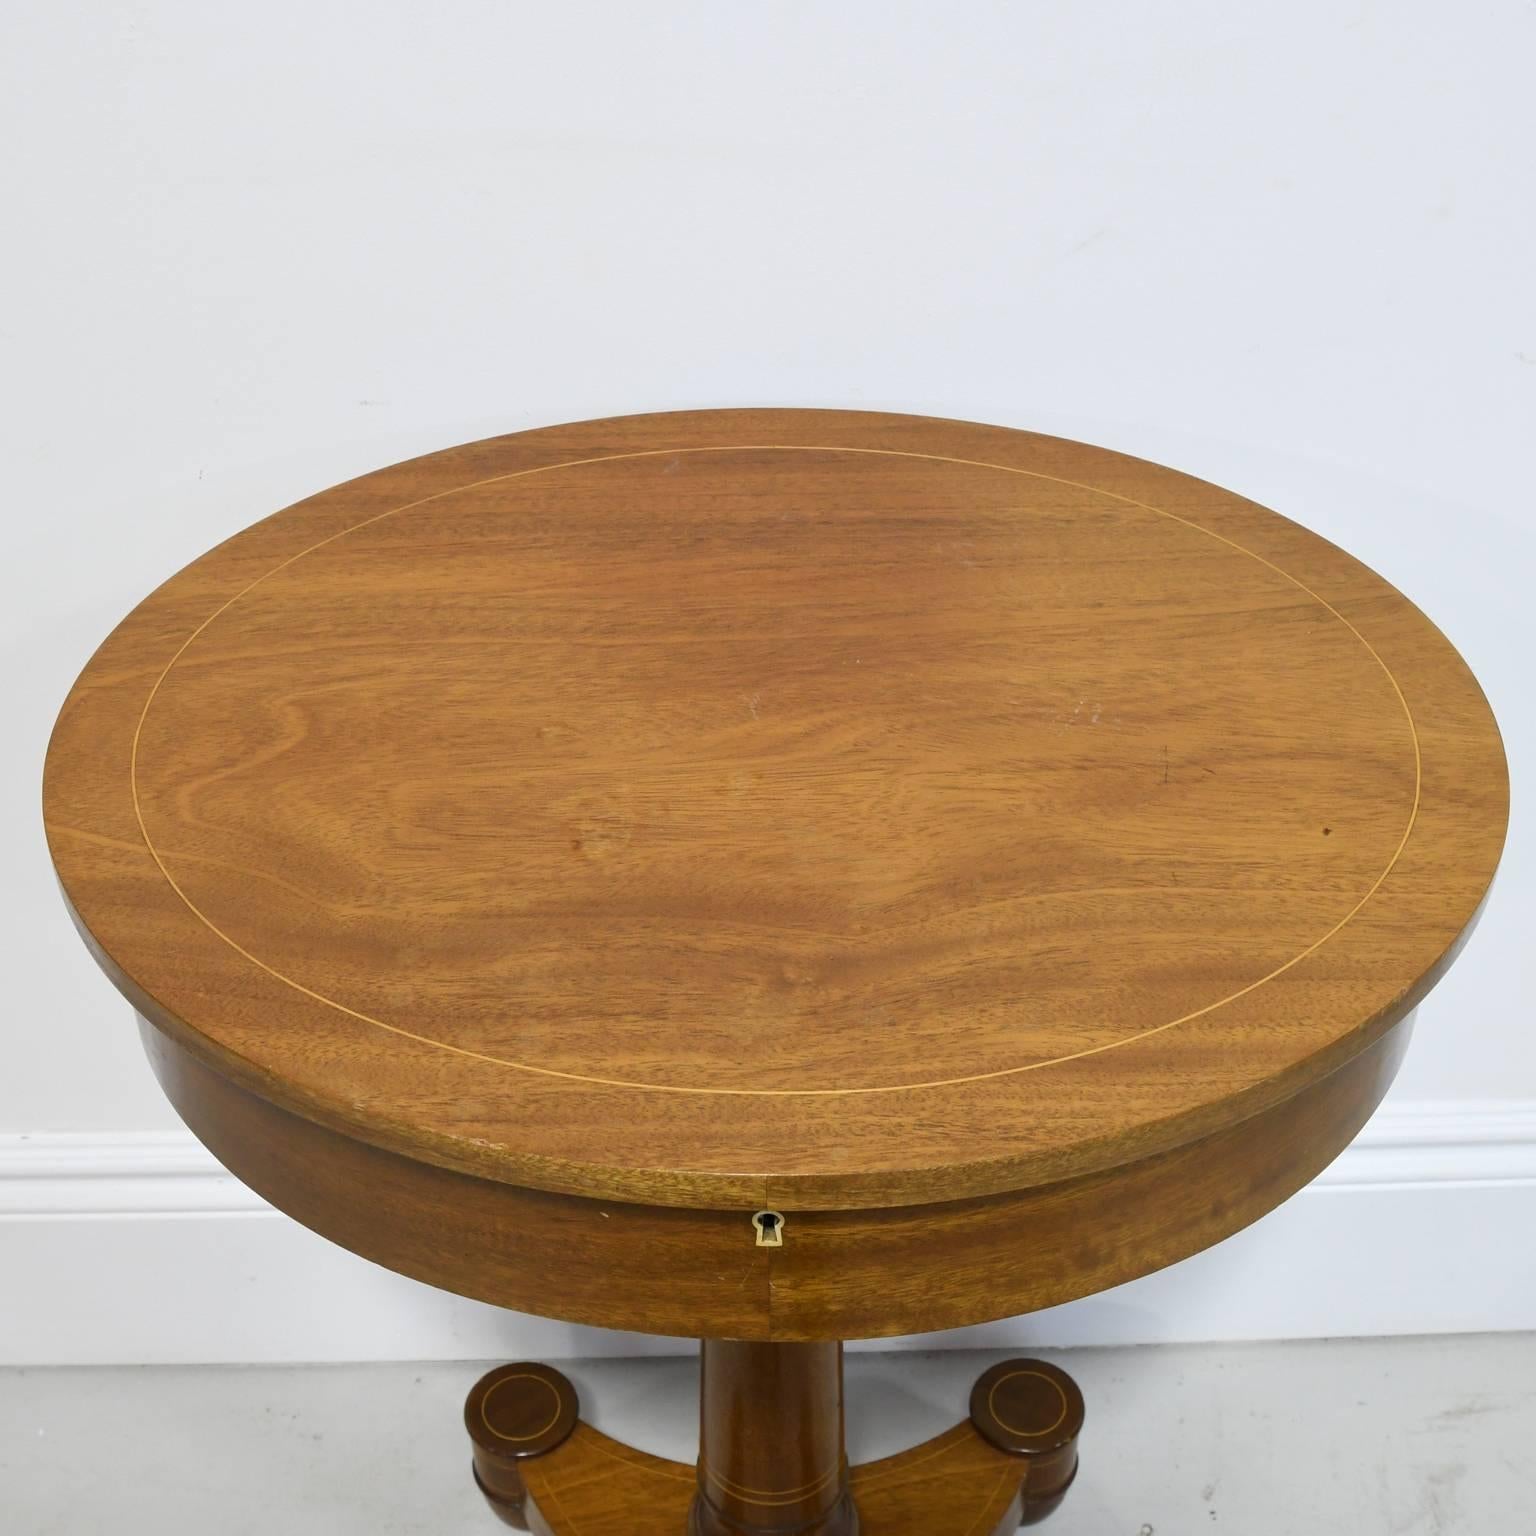 Scandinavian Late 19th Century Oval Sewing Table in Light Mahogany with Line Inlays